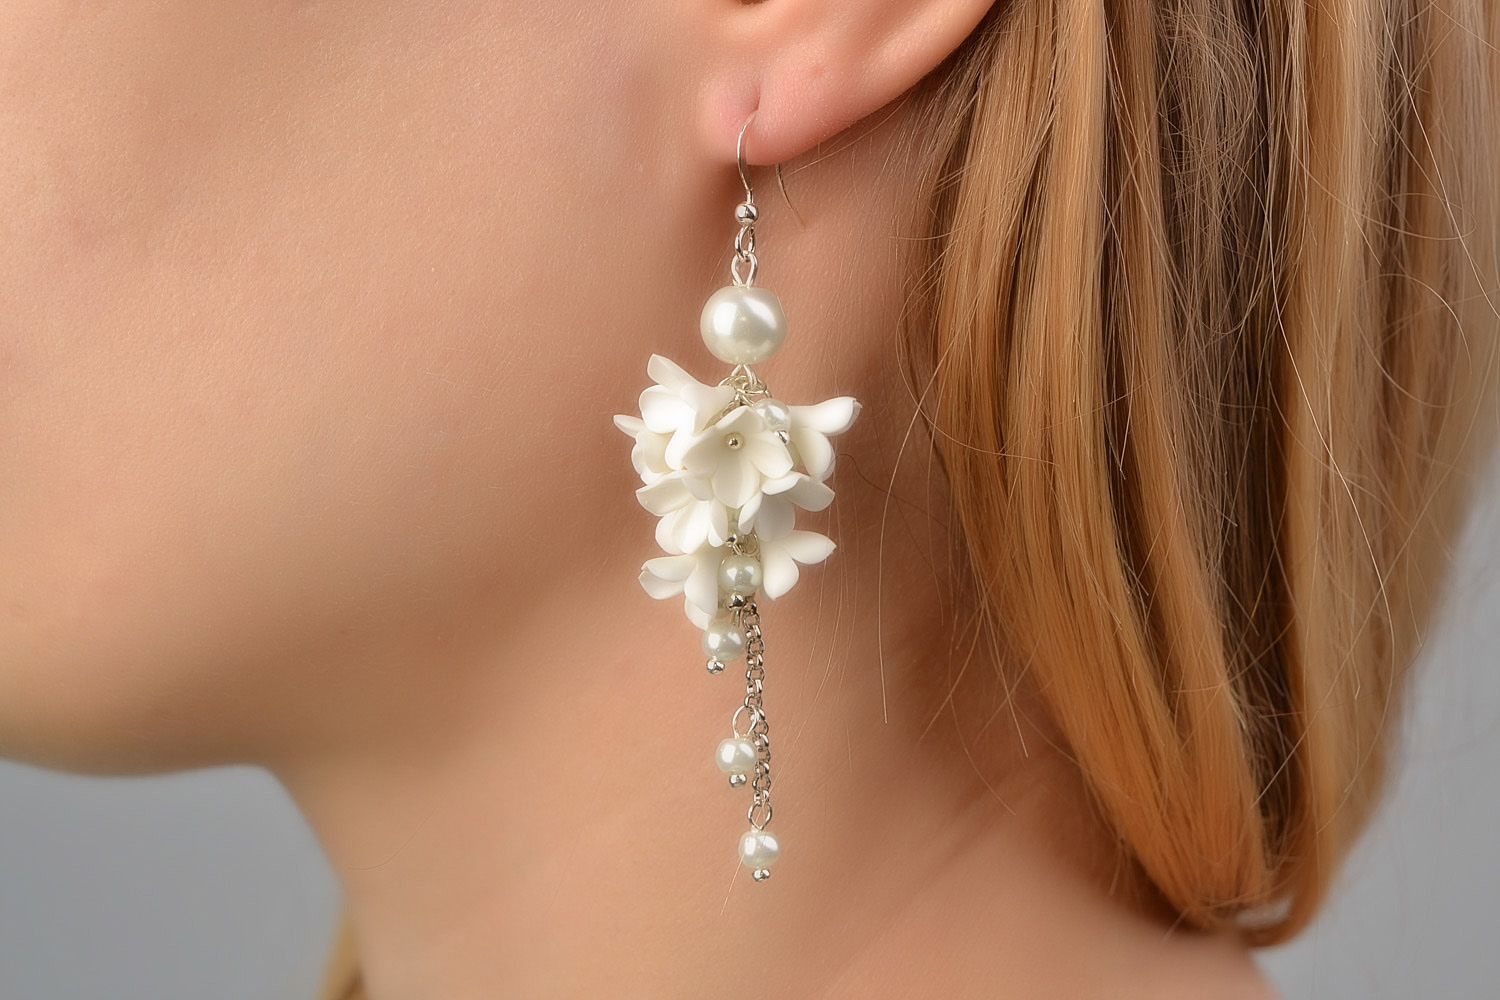 Handmade wedding dangling earrings with white polymer clay flowers and glass beads photo 2